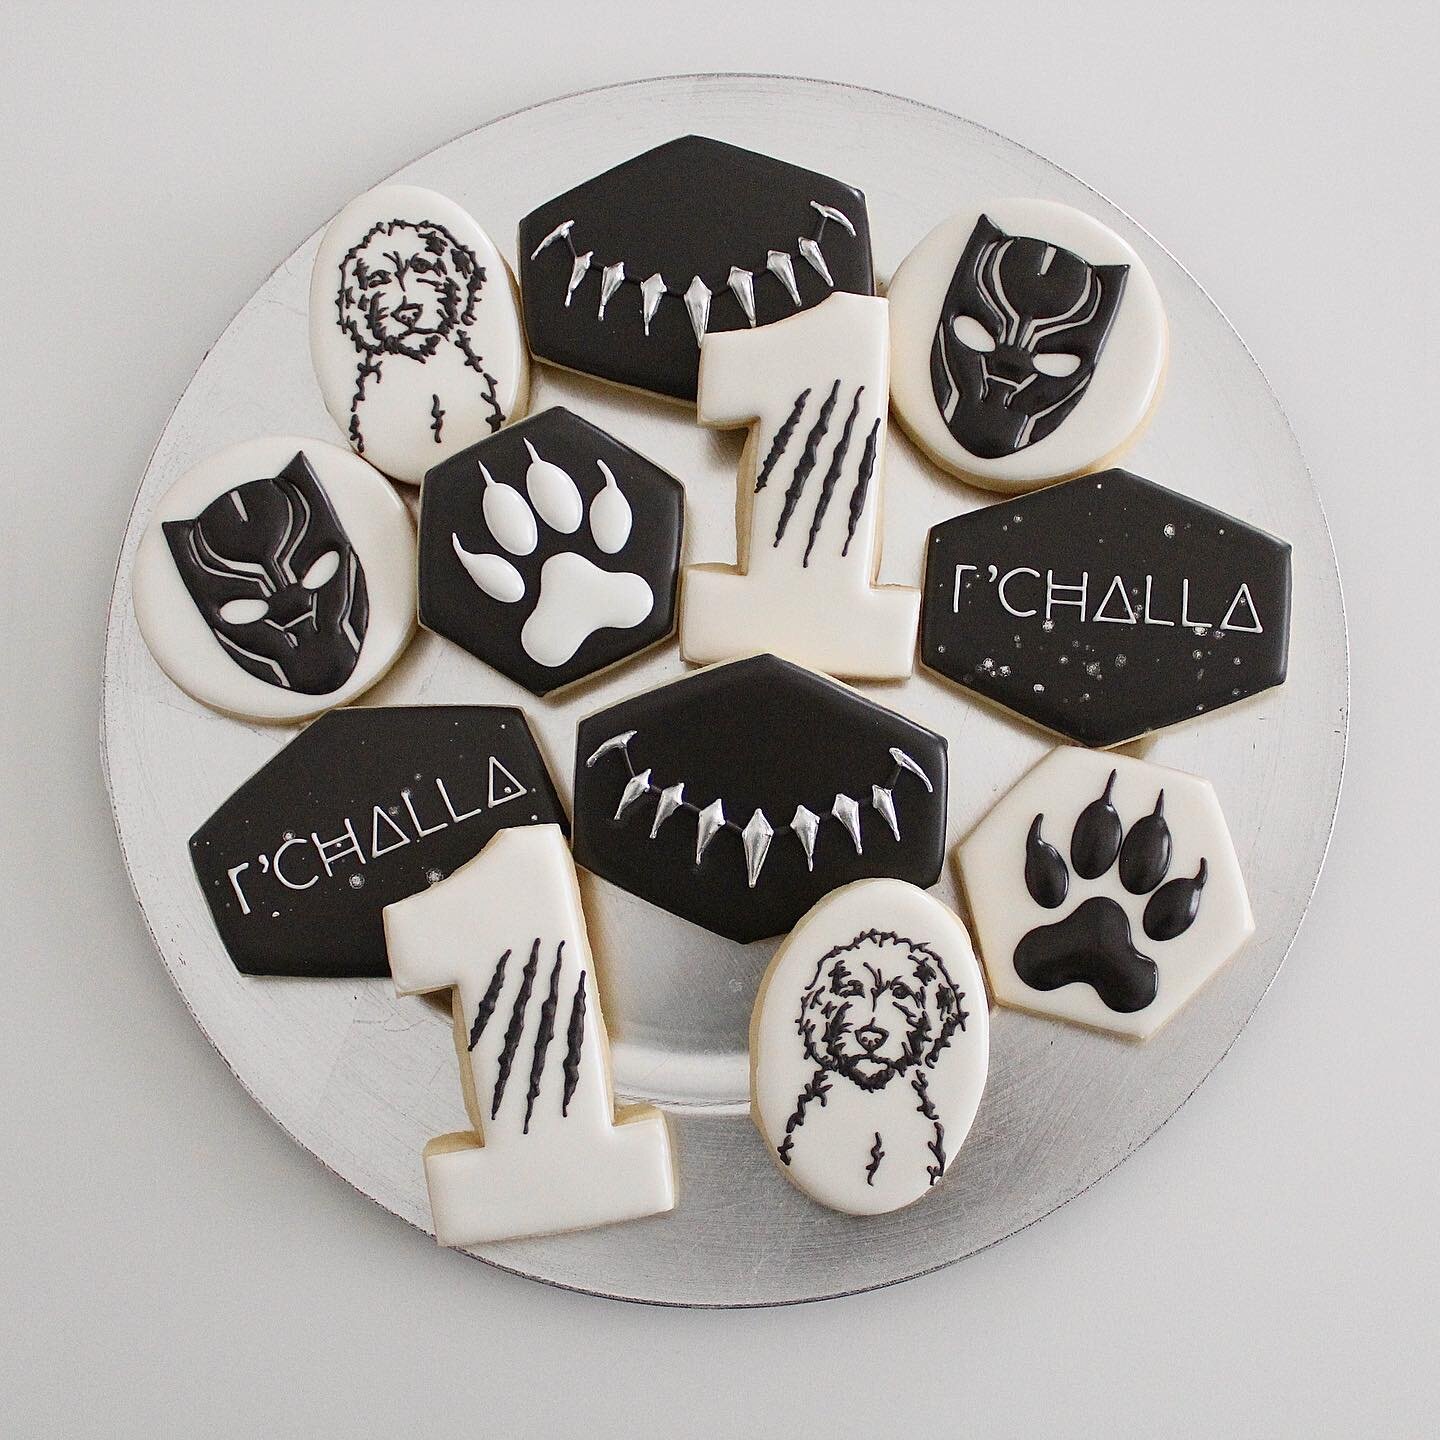 Happy 1st birthday to a sweet 🐶 named after black panther! 🐆 
.
.
.
.
.
.
.
.
.
.
#birthdaycookies #sugarcookies #sugarcookiesofinstagram #blackpanthercookies #dogcookies #utahcustomcookies #slccustomcookies #panthercookies #cookies #royalicingcook